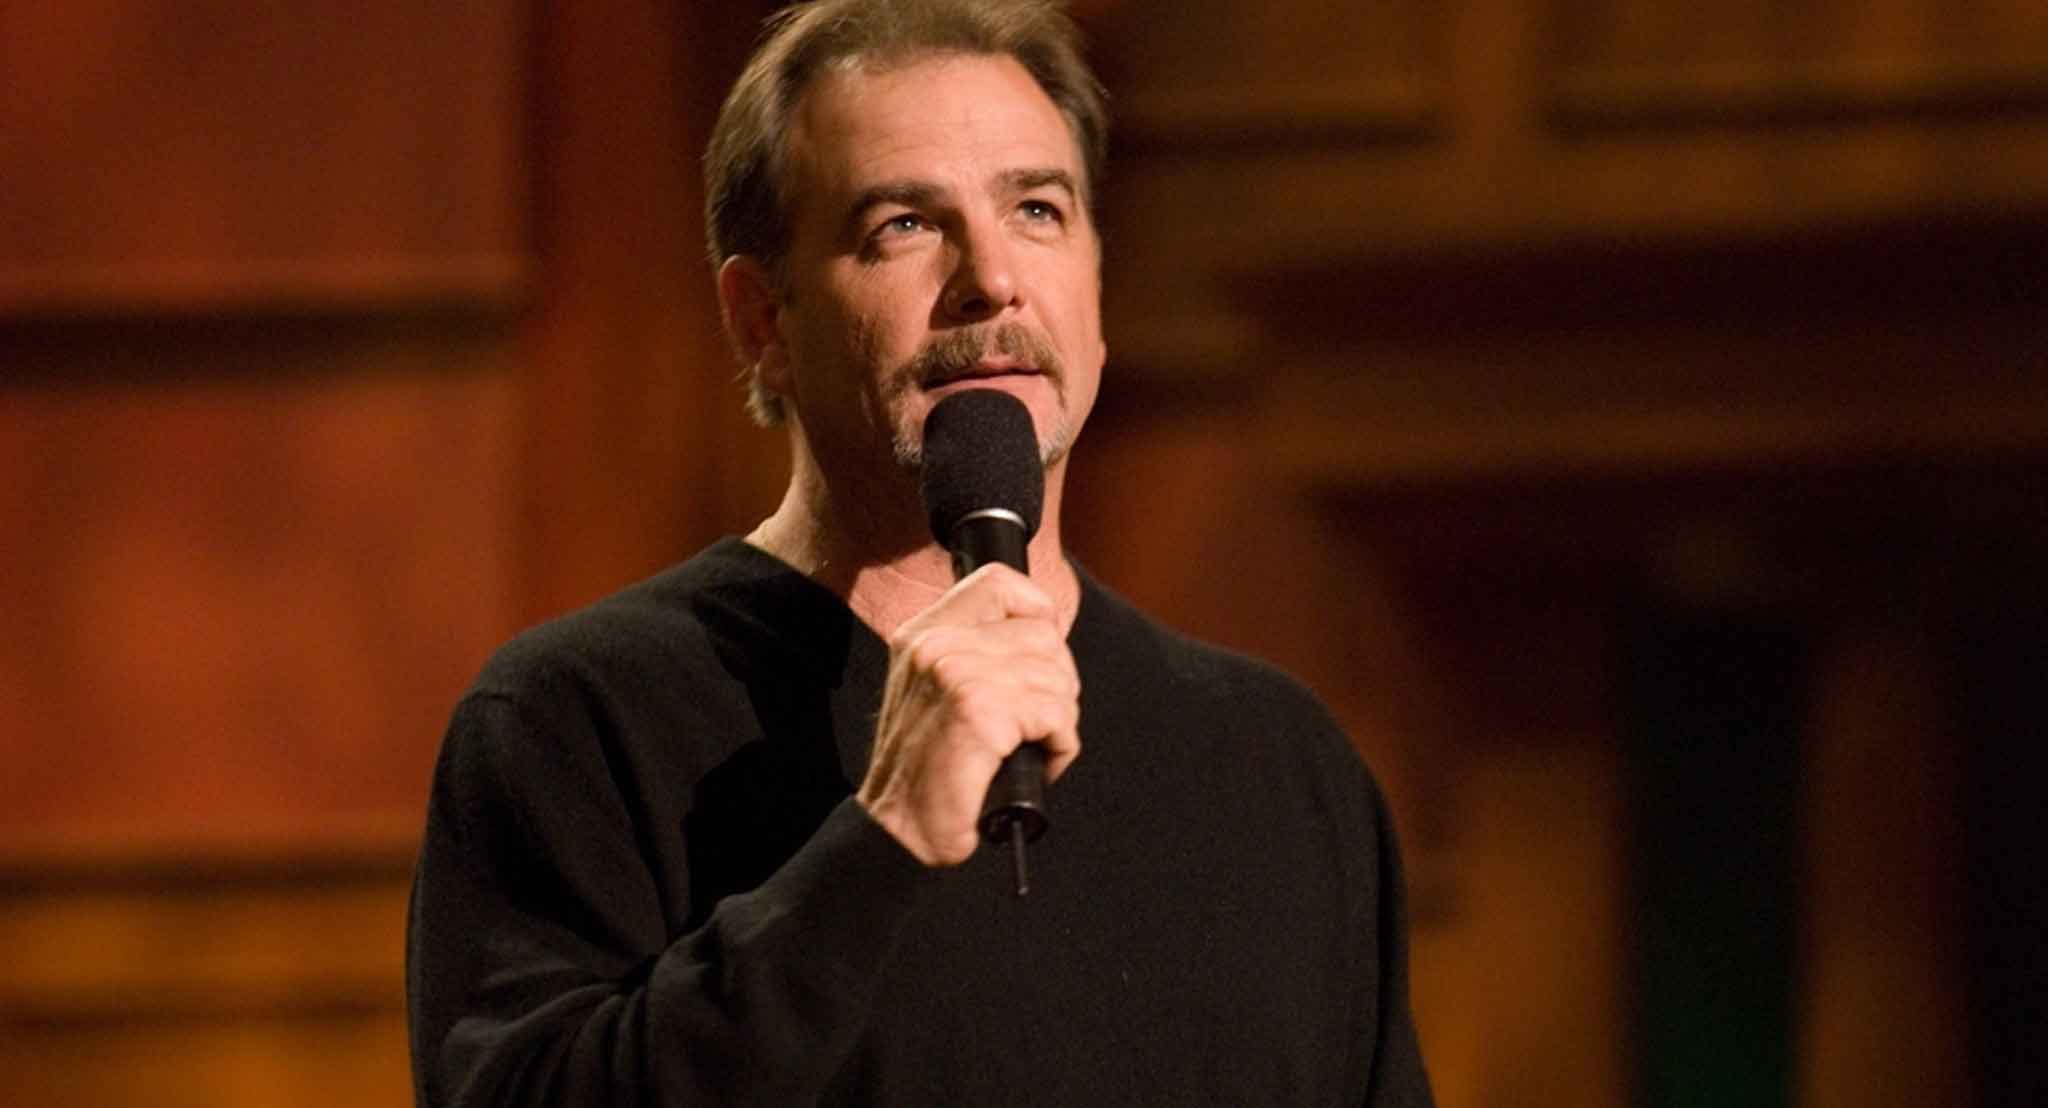 Who is Bill Engvall Wife? His Body Statistics, Net Worth, And Career